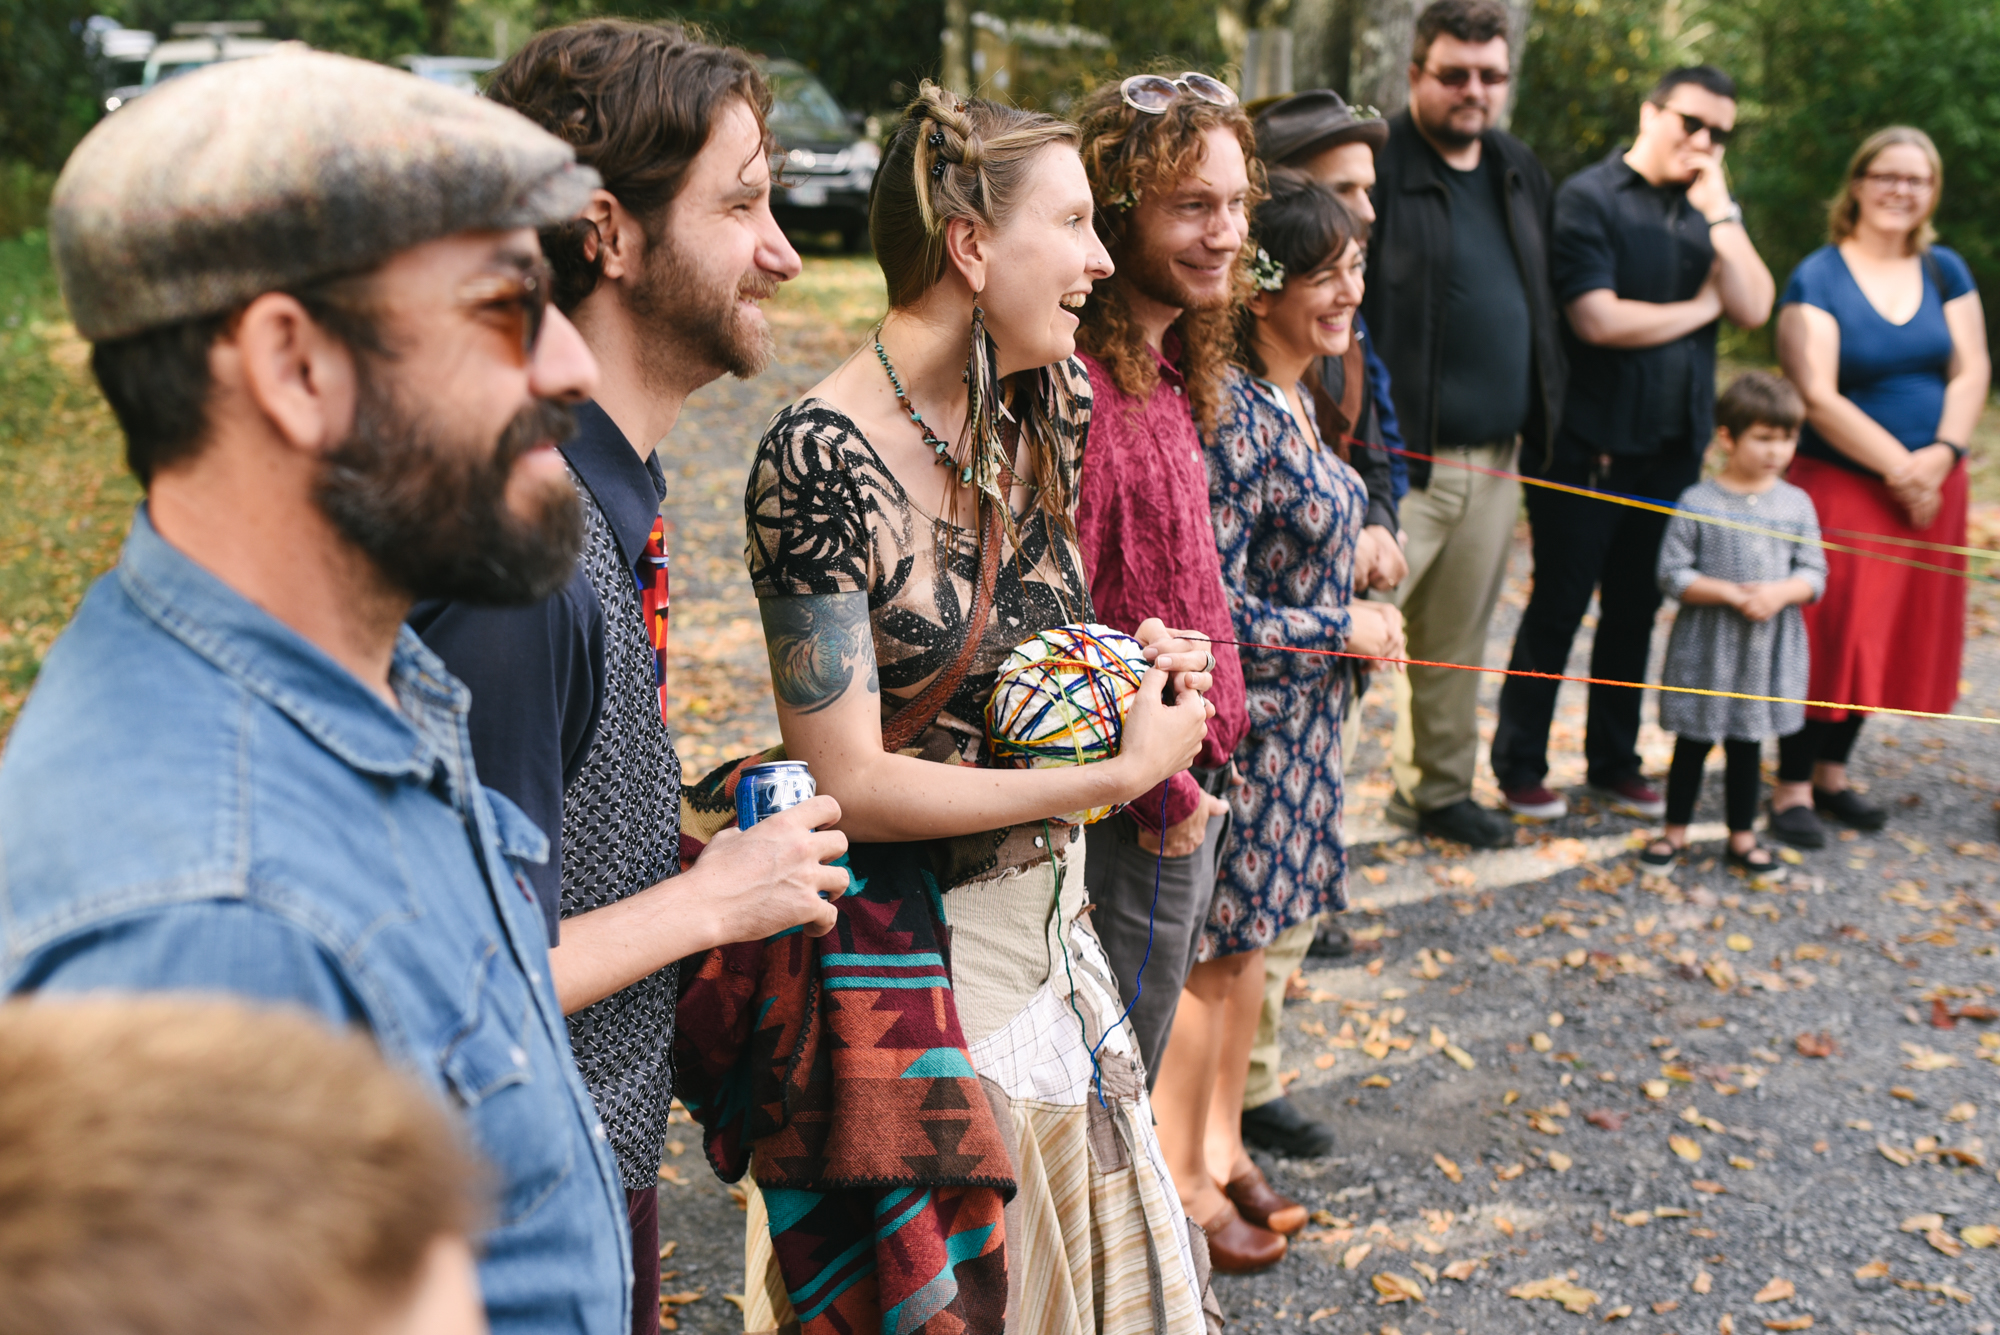  Mountain Wedding, Outdoors, Rustic, West Virginia, Maryland Wedding Photographer, DIY, Casual, Guests in yarn weaving ceremony 